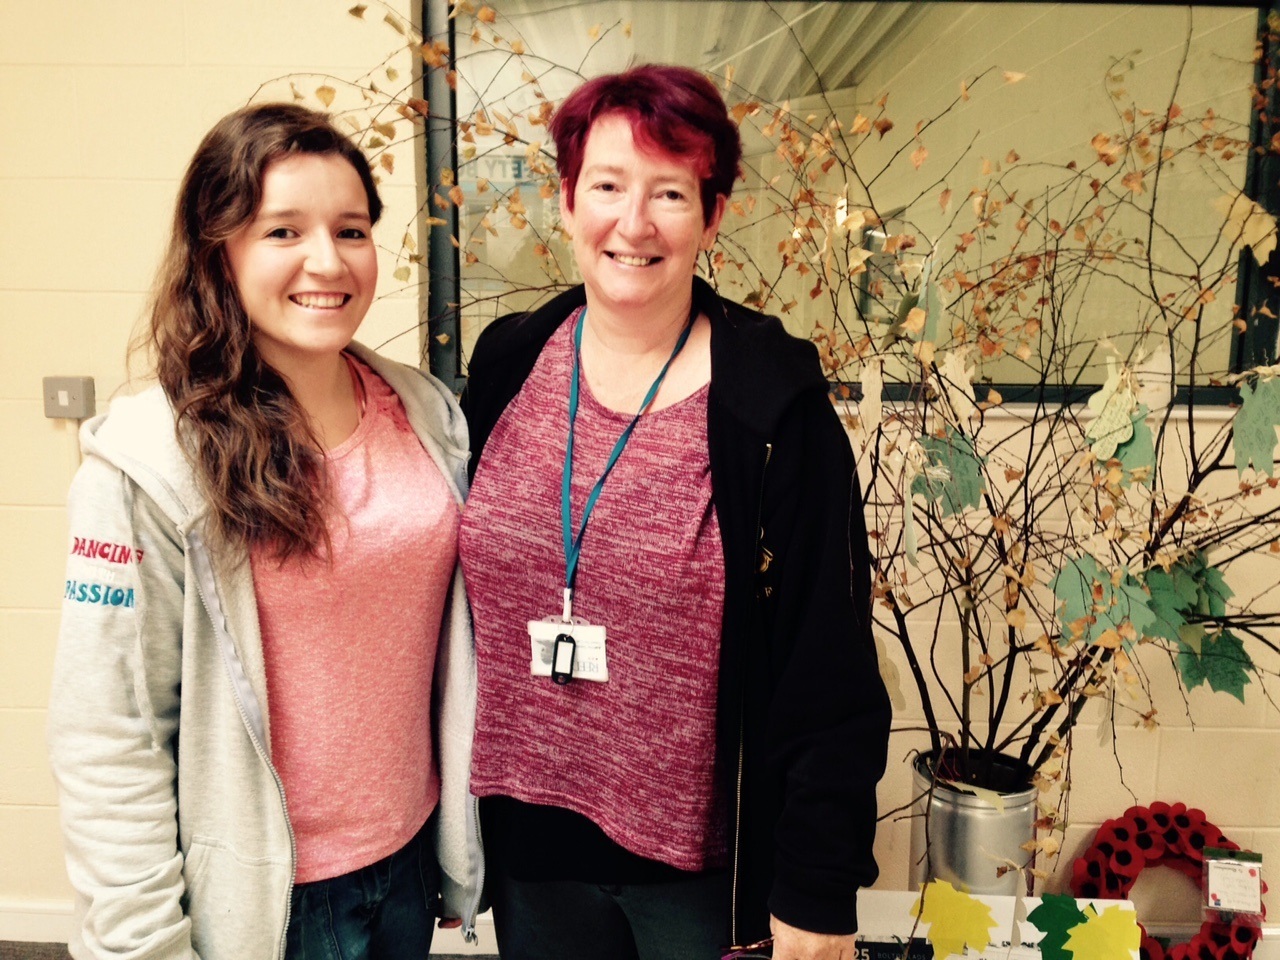 Mentor has a new volunteer - her daughter - The Bolton News